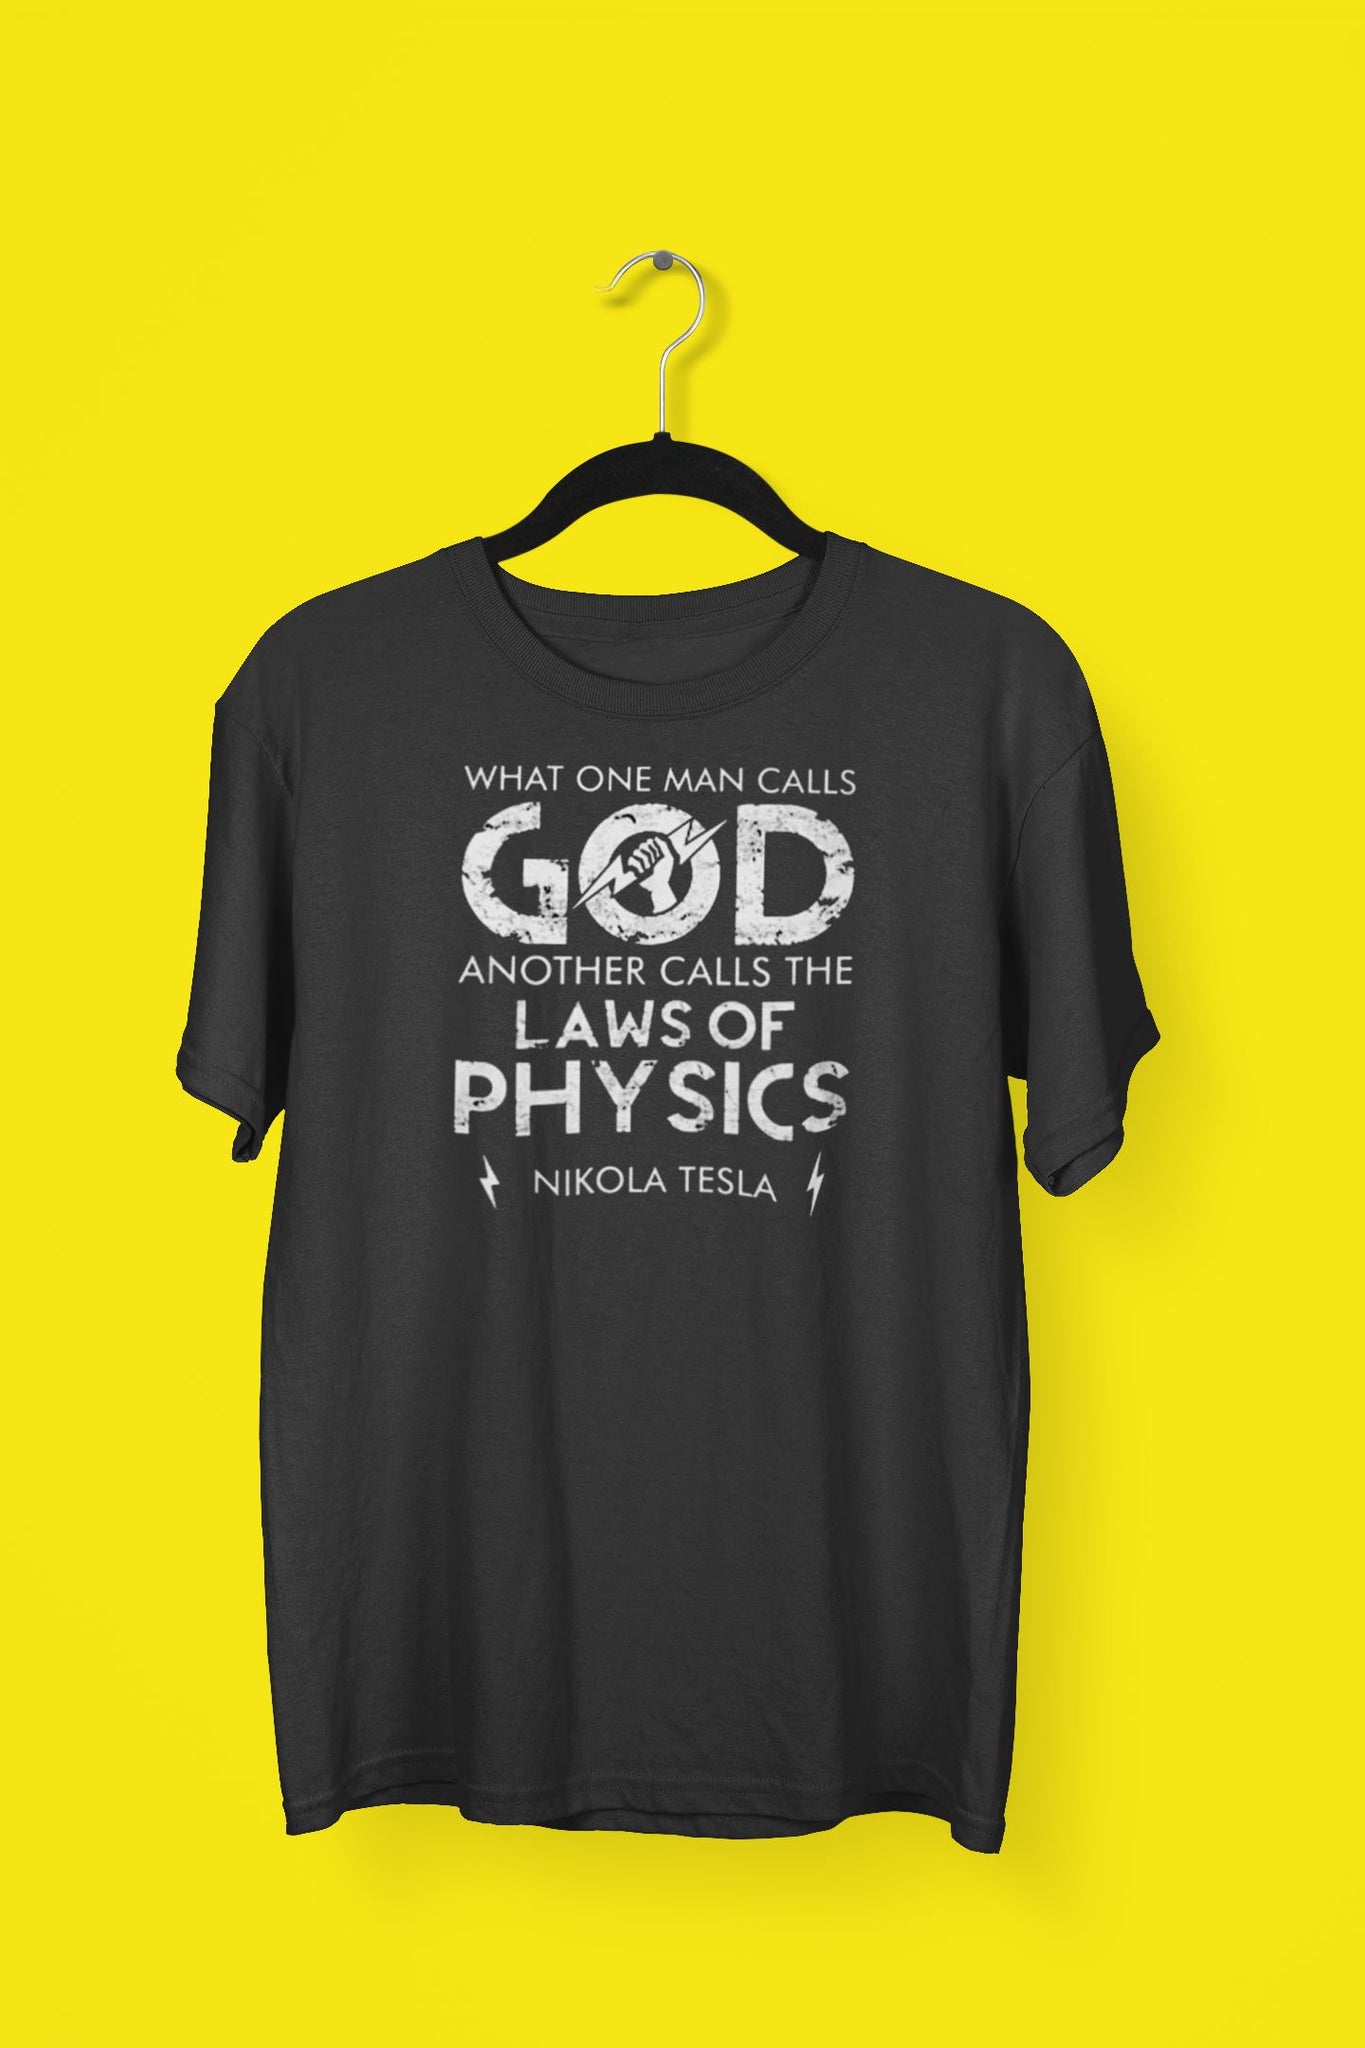 Laws of Physics Nikola Tesla Exclusive Black T Shirt for Men and Women freeshipping - Catch My Drift India